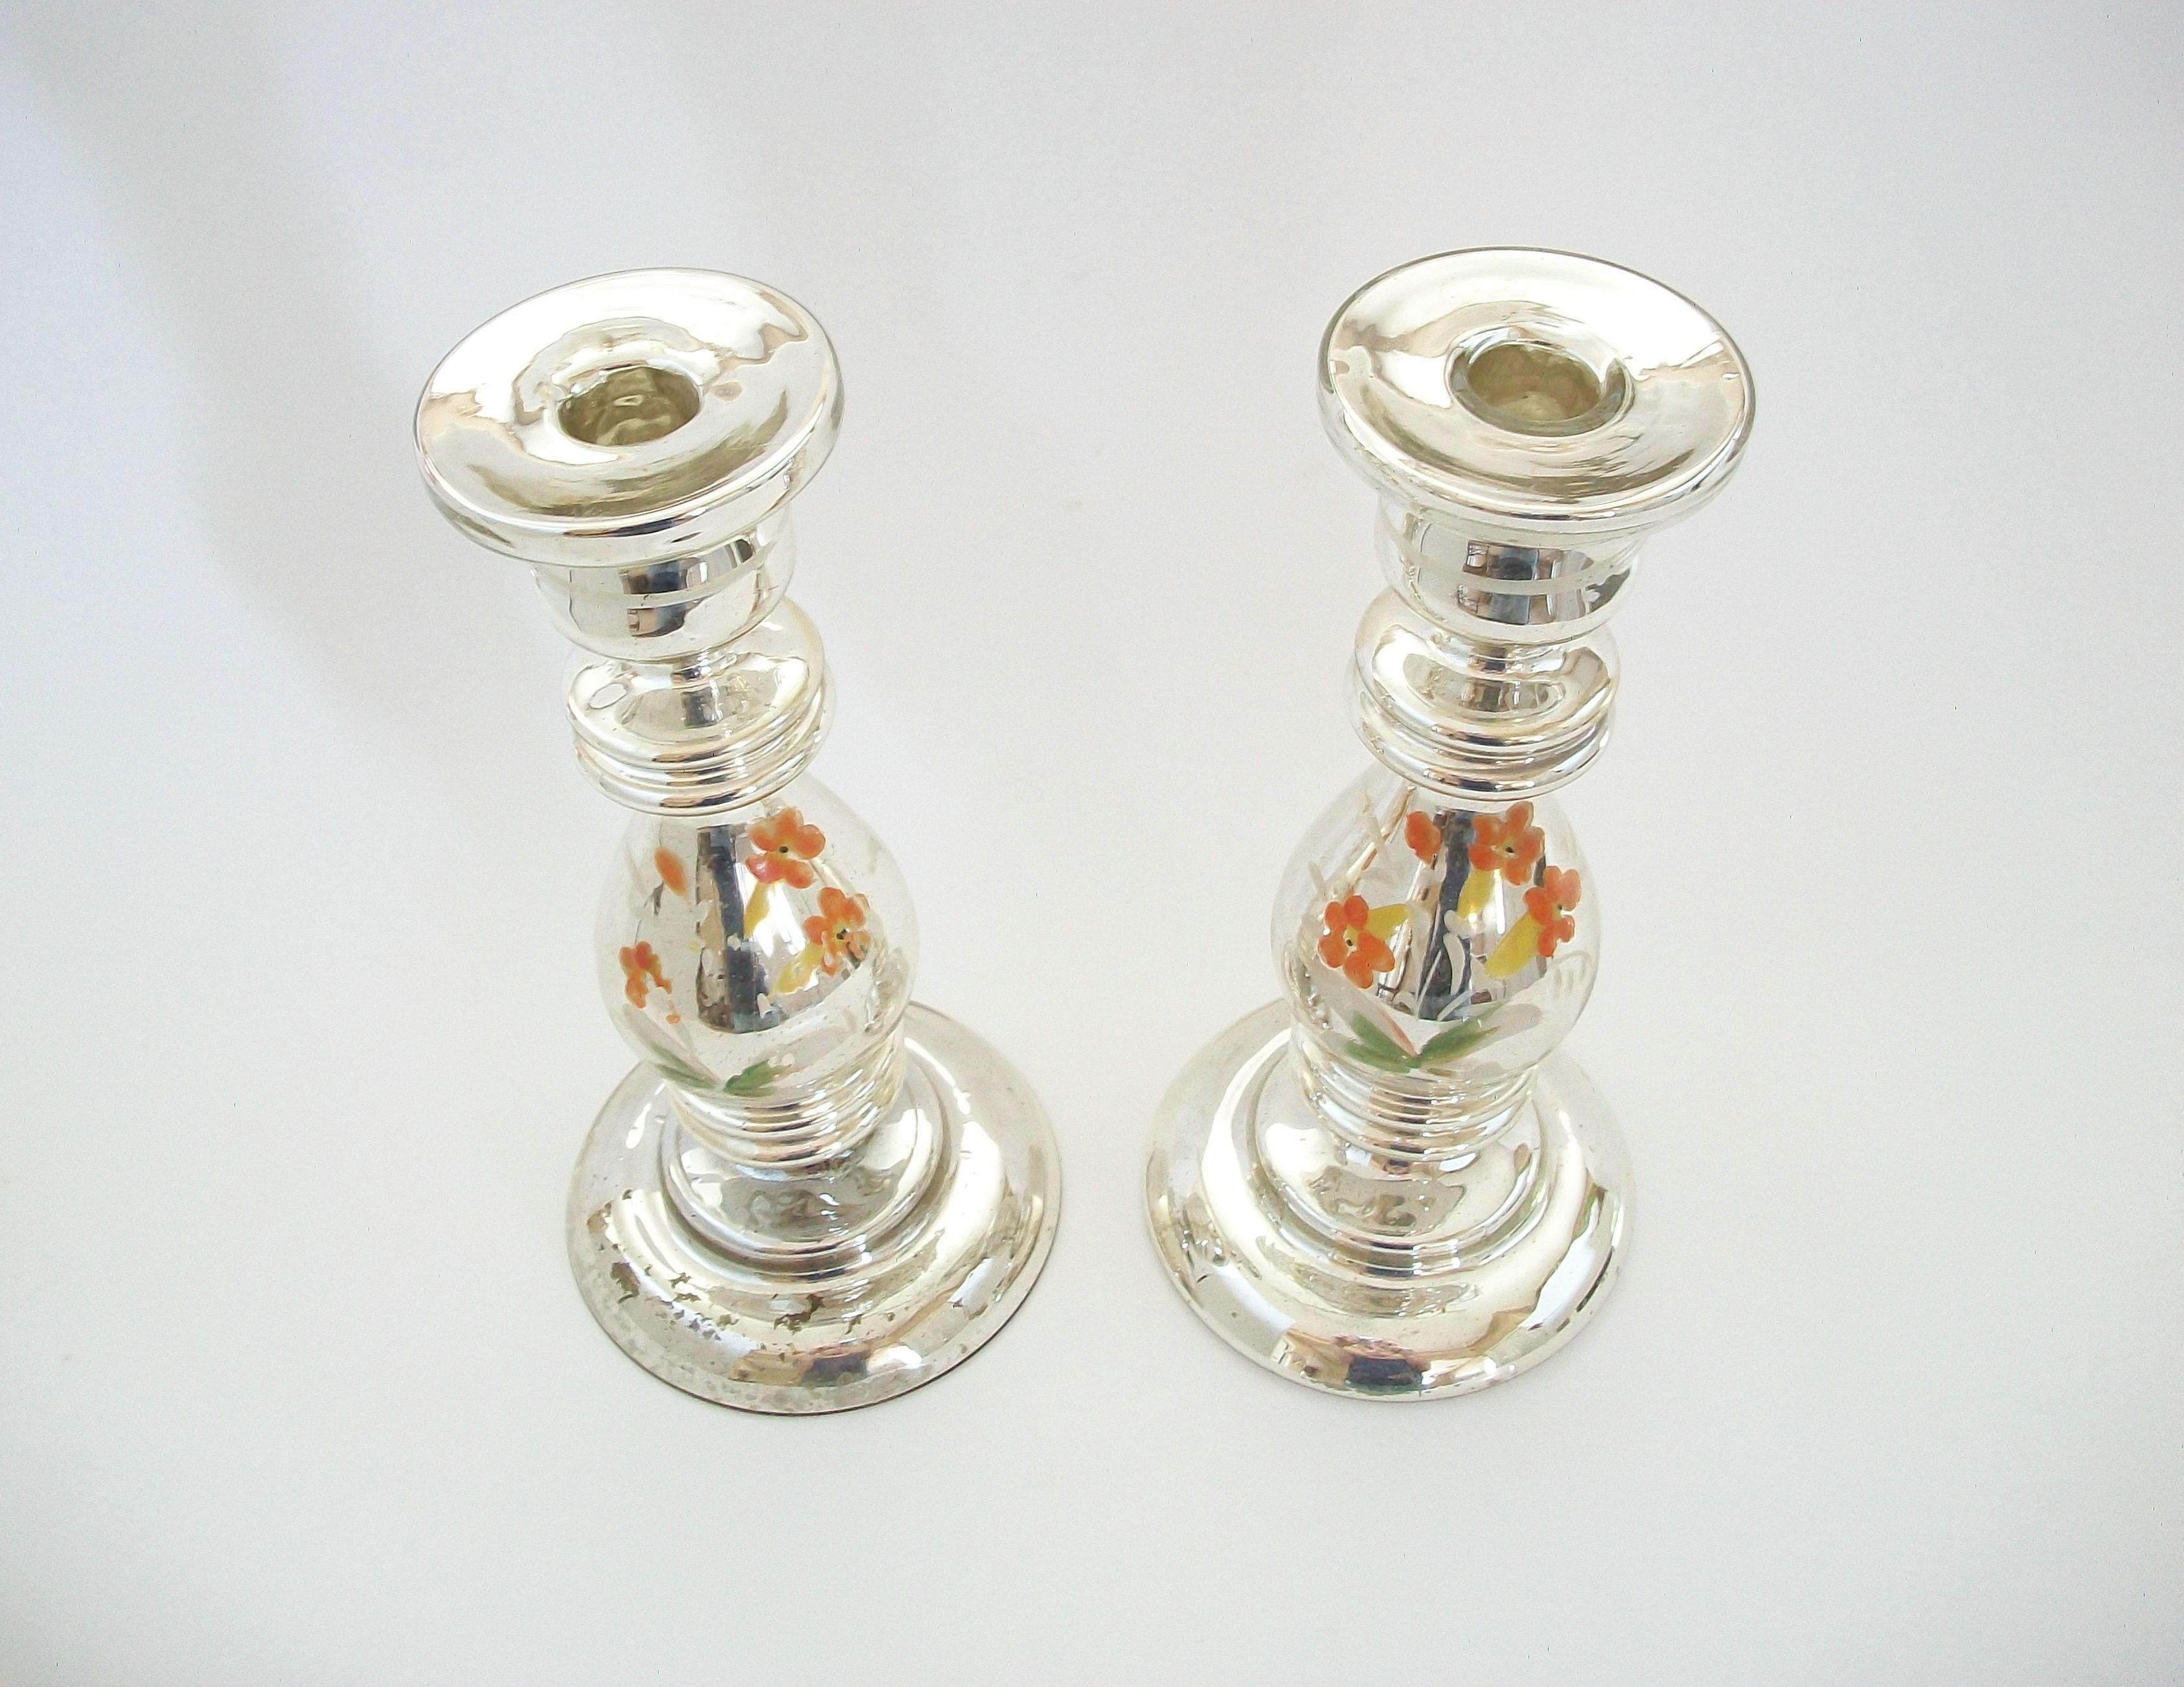 Antique Pair of Painted Mercury Glass Candlesticks - France - Late 19th Century 1